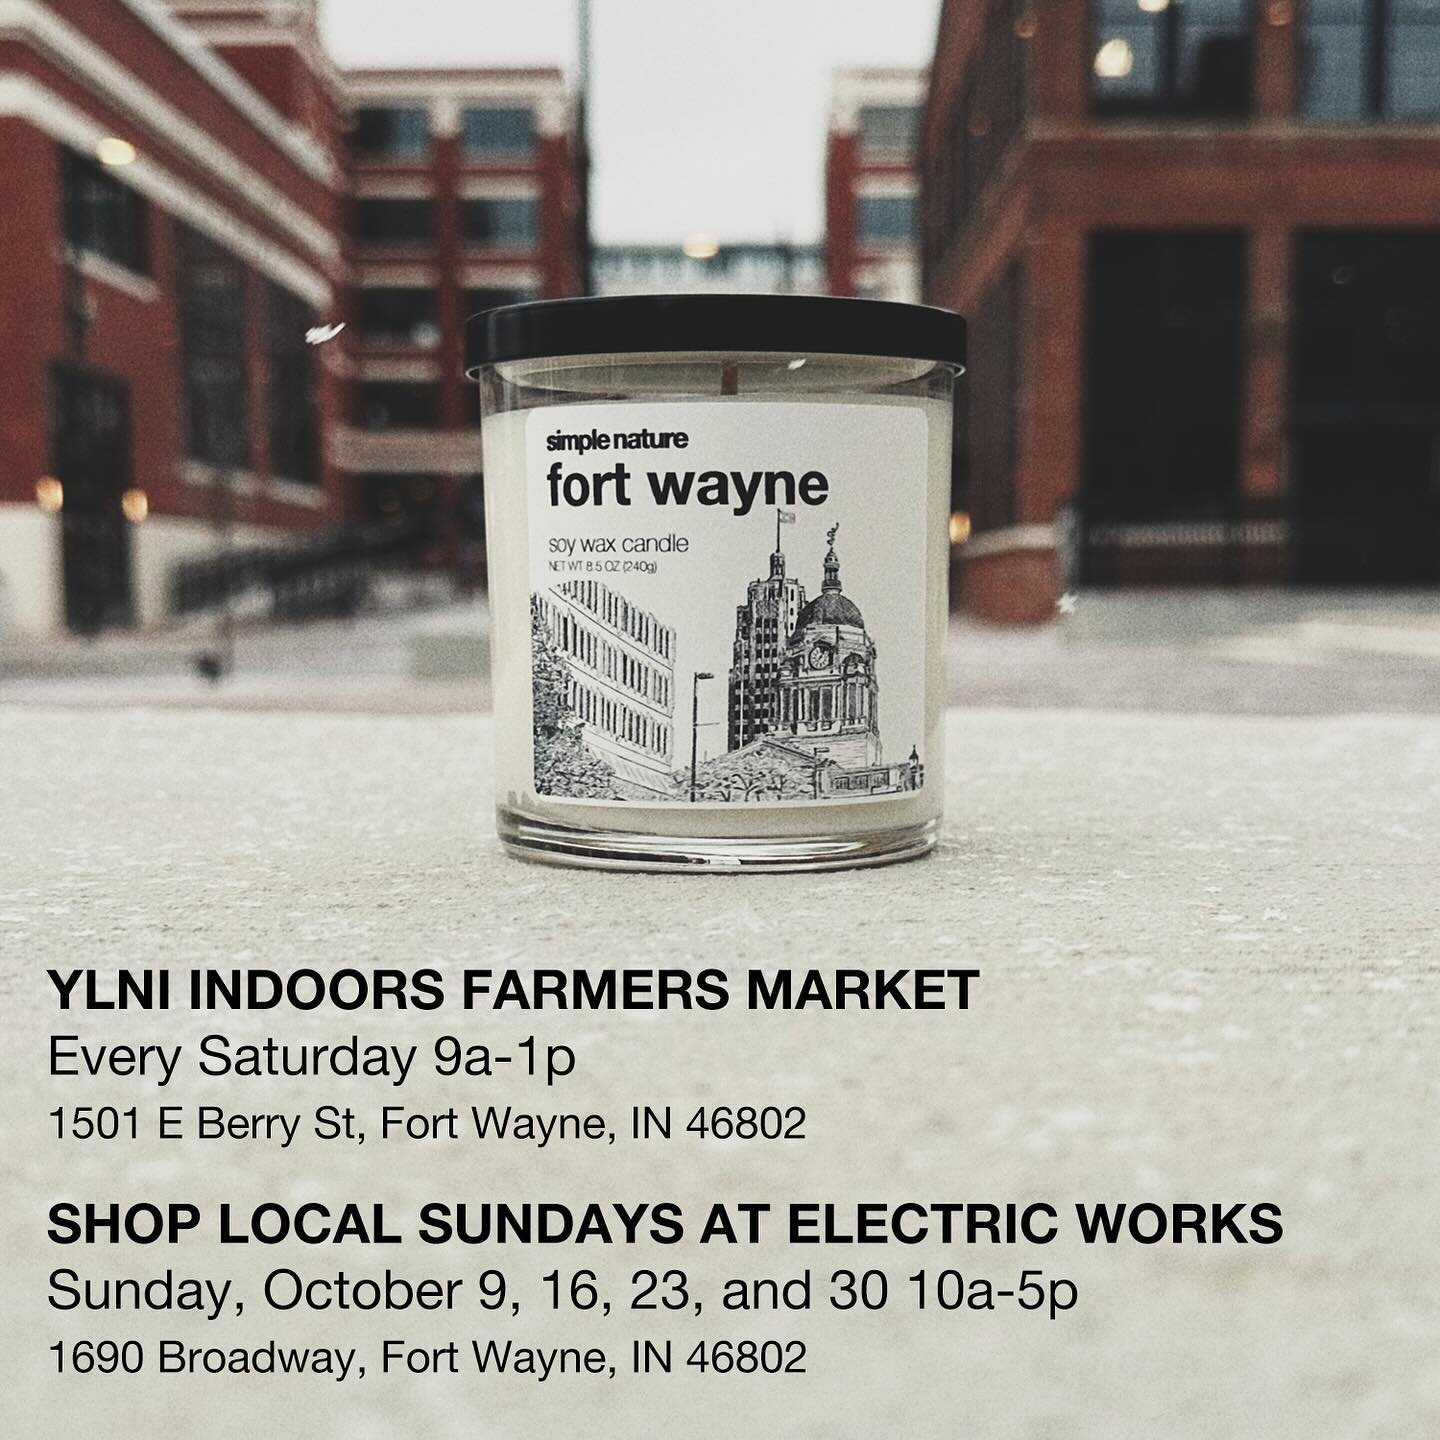 Starting this Saturday, the @ylnifarmersmarket is moving indoors for the season, and I couldn&rsquo;t be more thrilled! To celebrate you can be one of the first to try 9 new scents before they&rsquo;re posted on SimpleNature.net.
But we ain&rsquo;t d